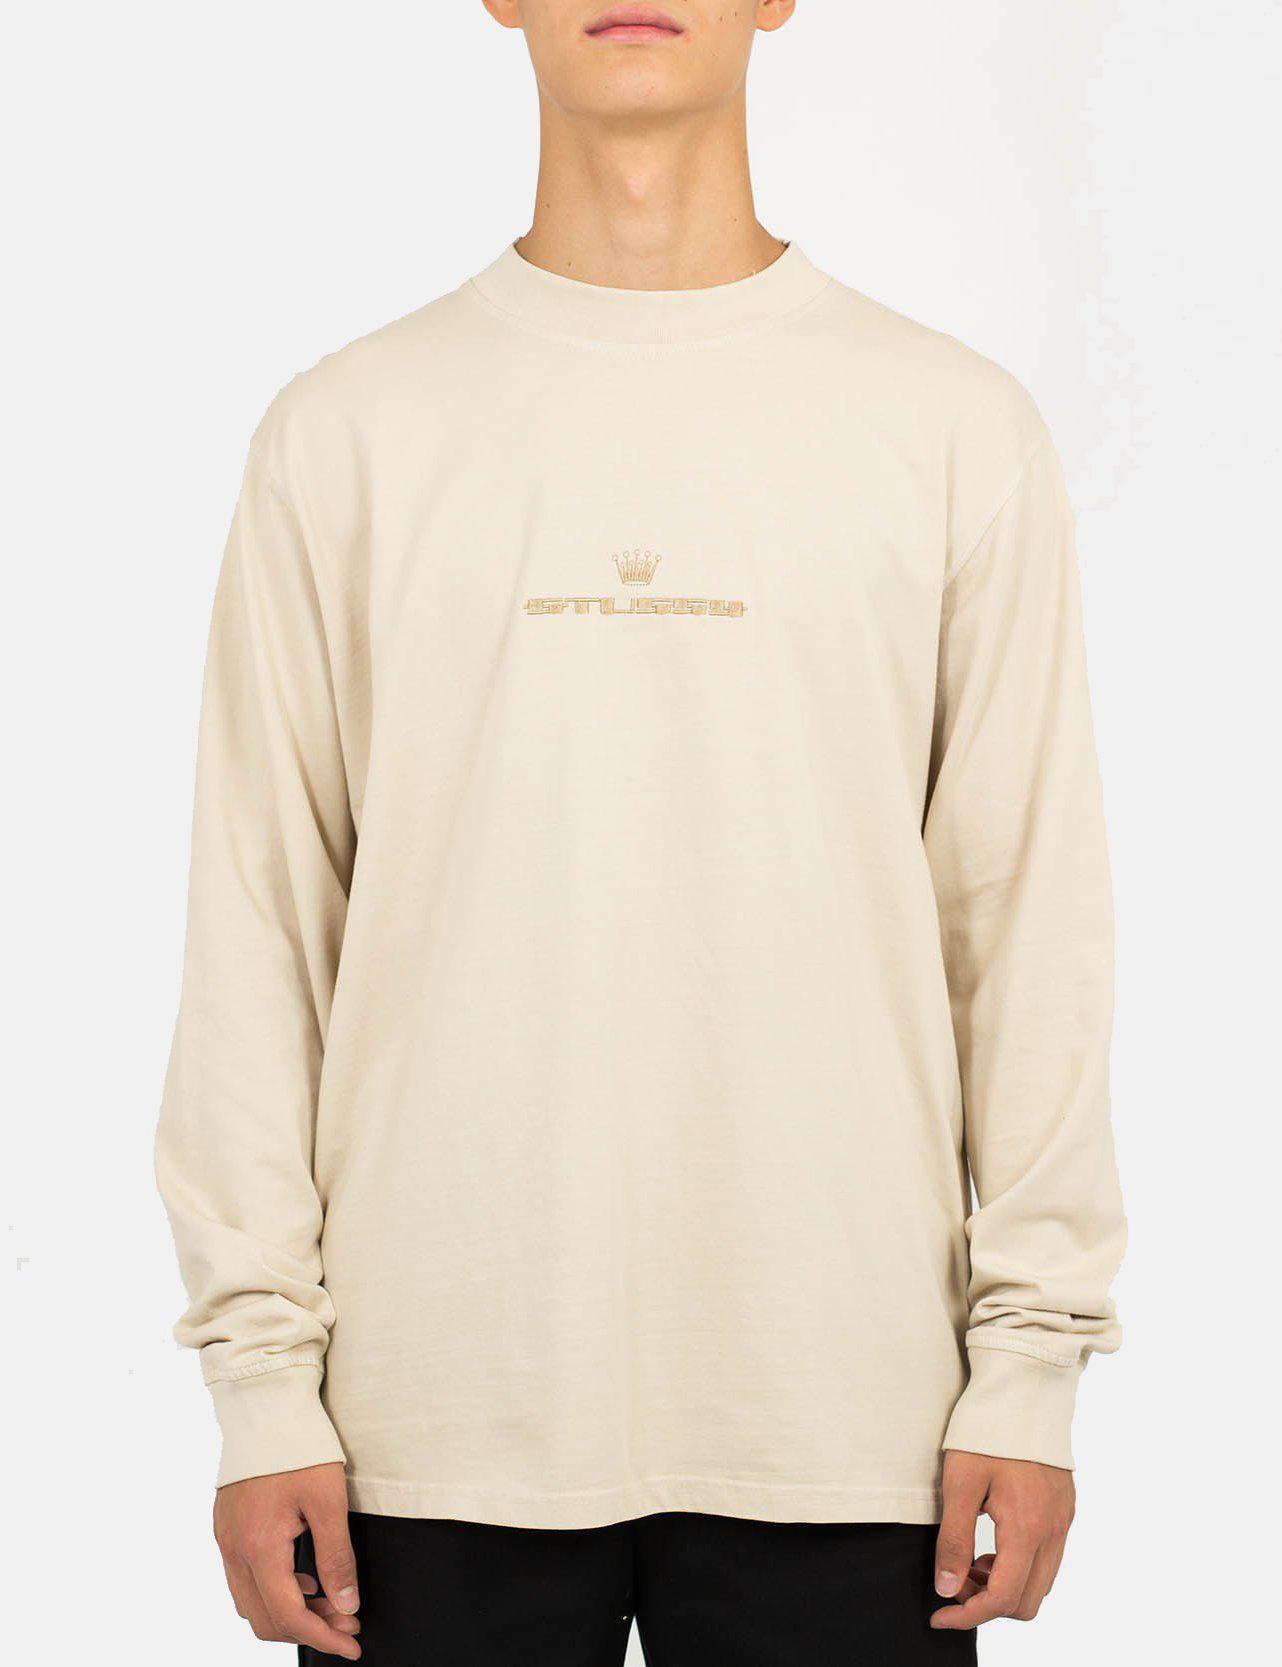 Download Stussy Cotton Overdyed Mock Neck Long Sleeve T-shirt in ...